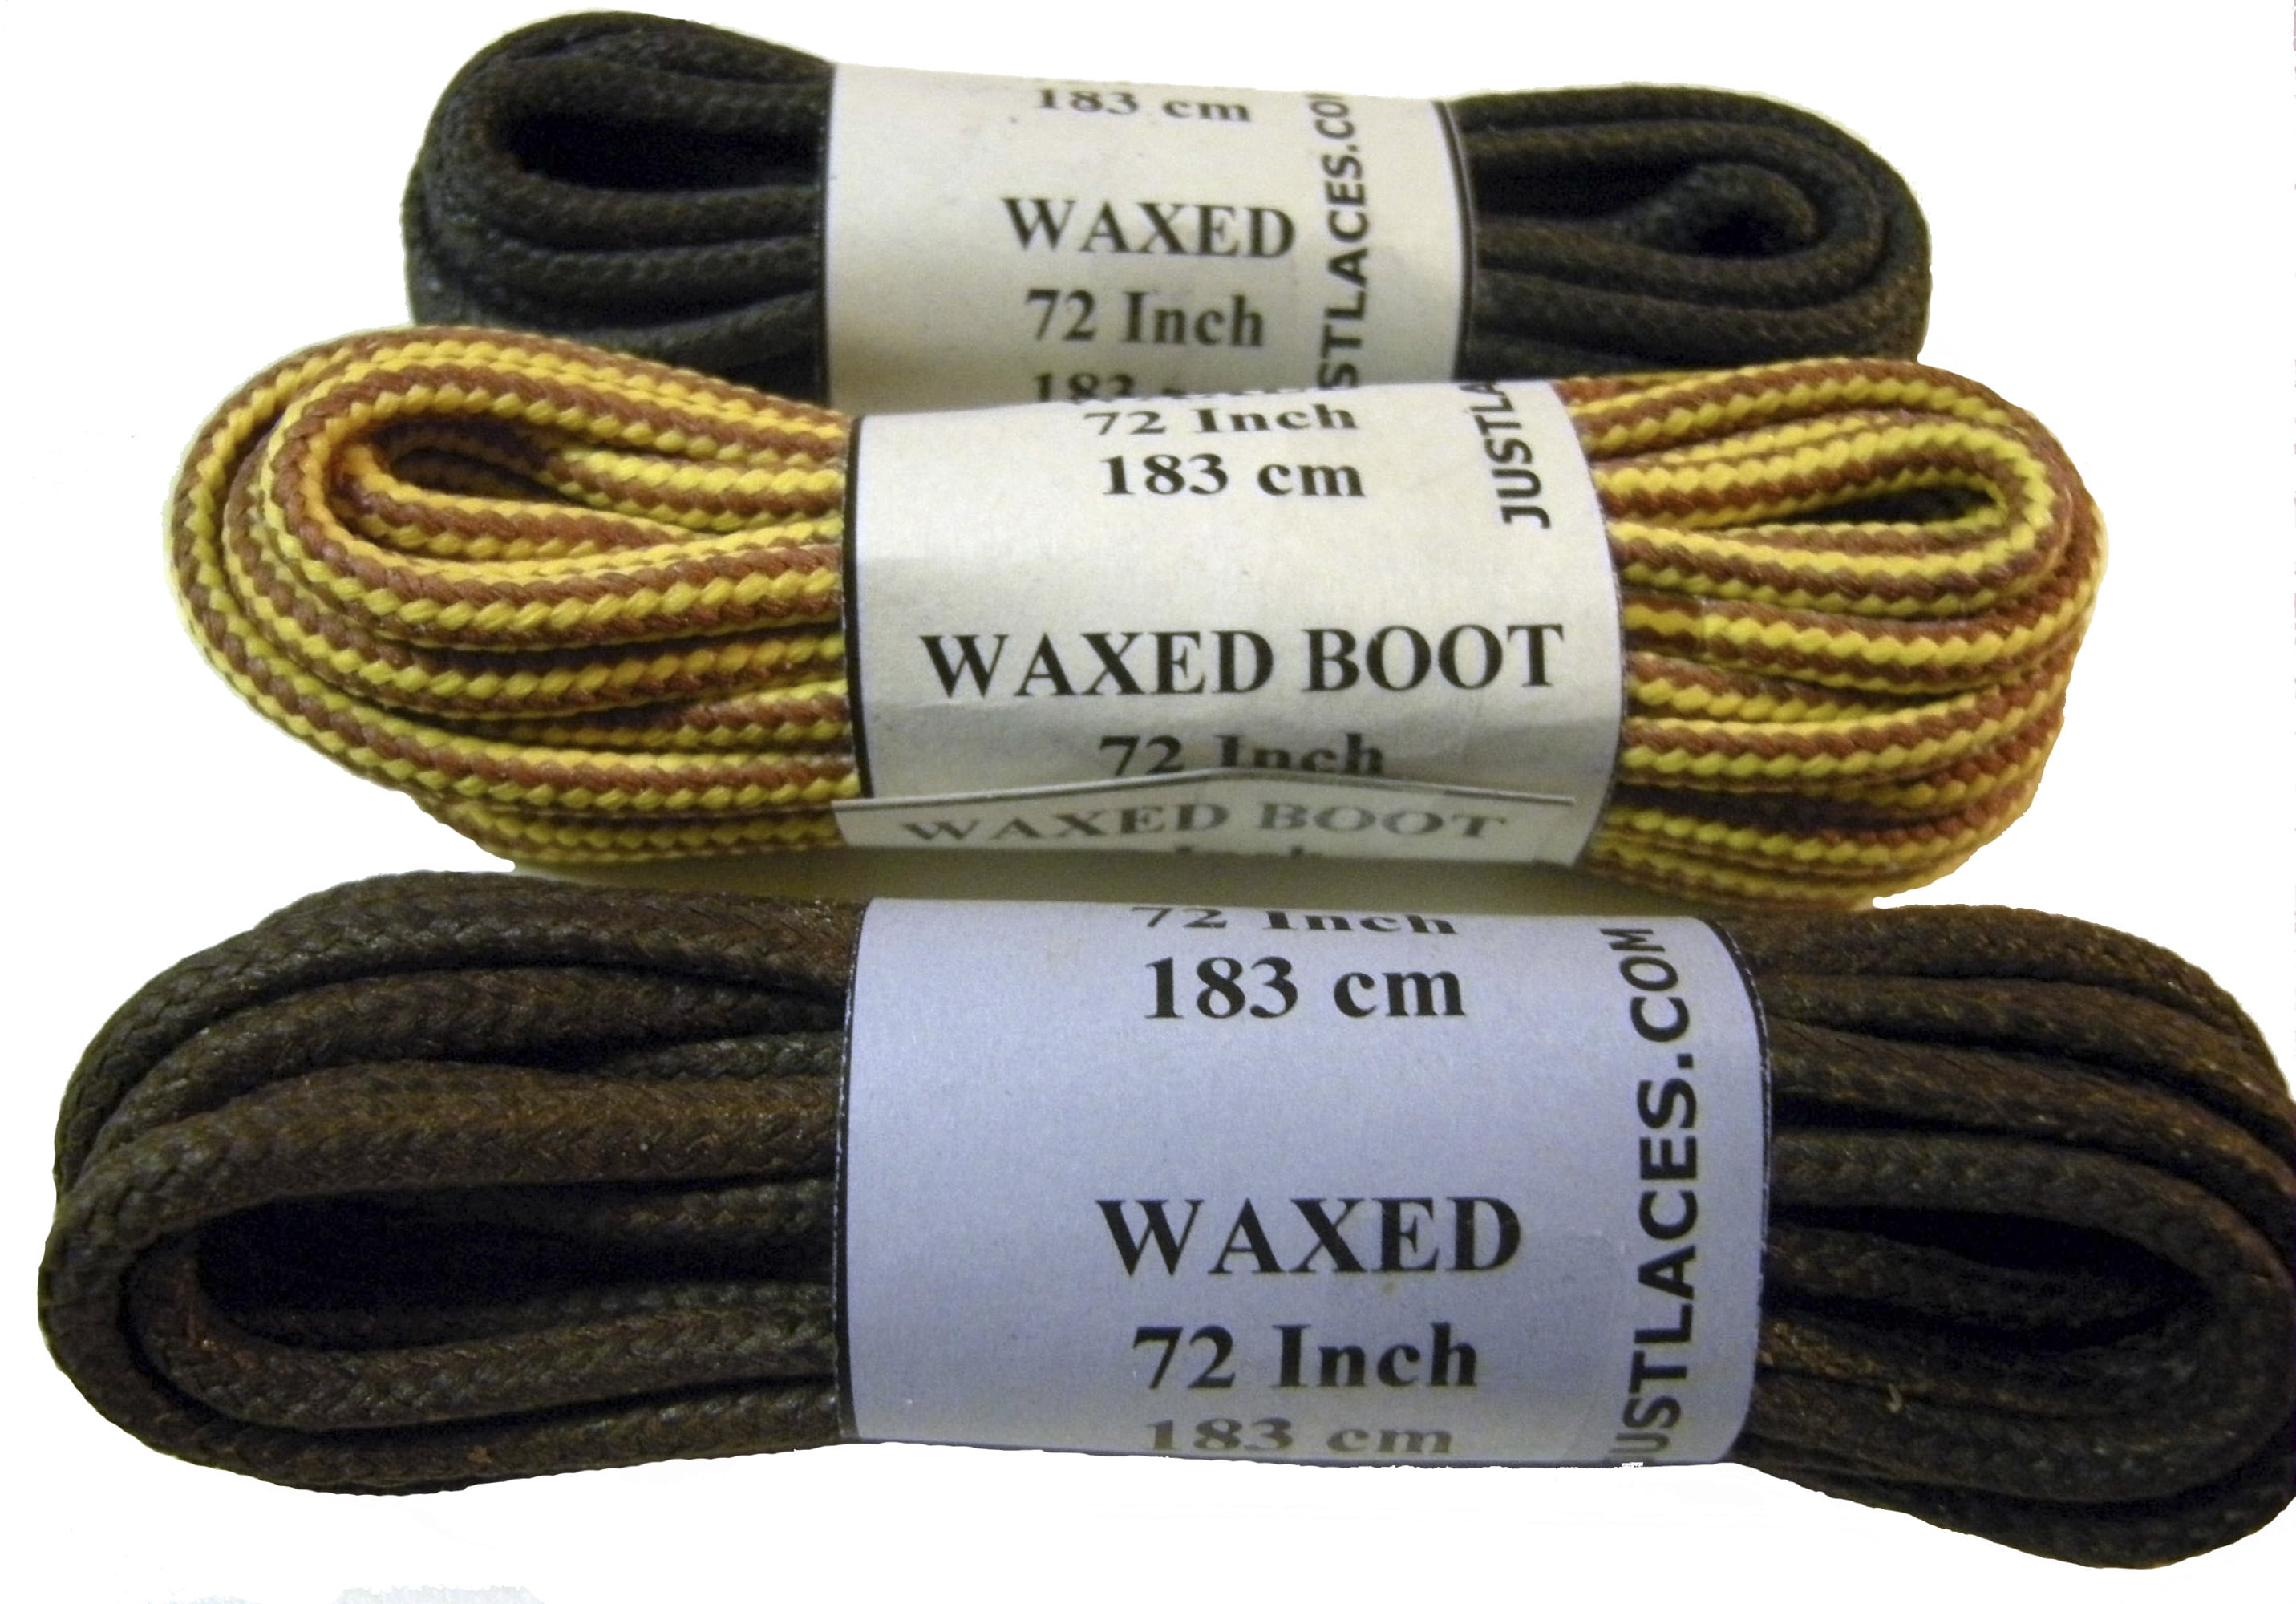 Shoe and Boot Laces Navy Blue 3 mm Round Leather sizes from 45 cm Shoes Insoles & Accessories Shoelaces 200 cm 